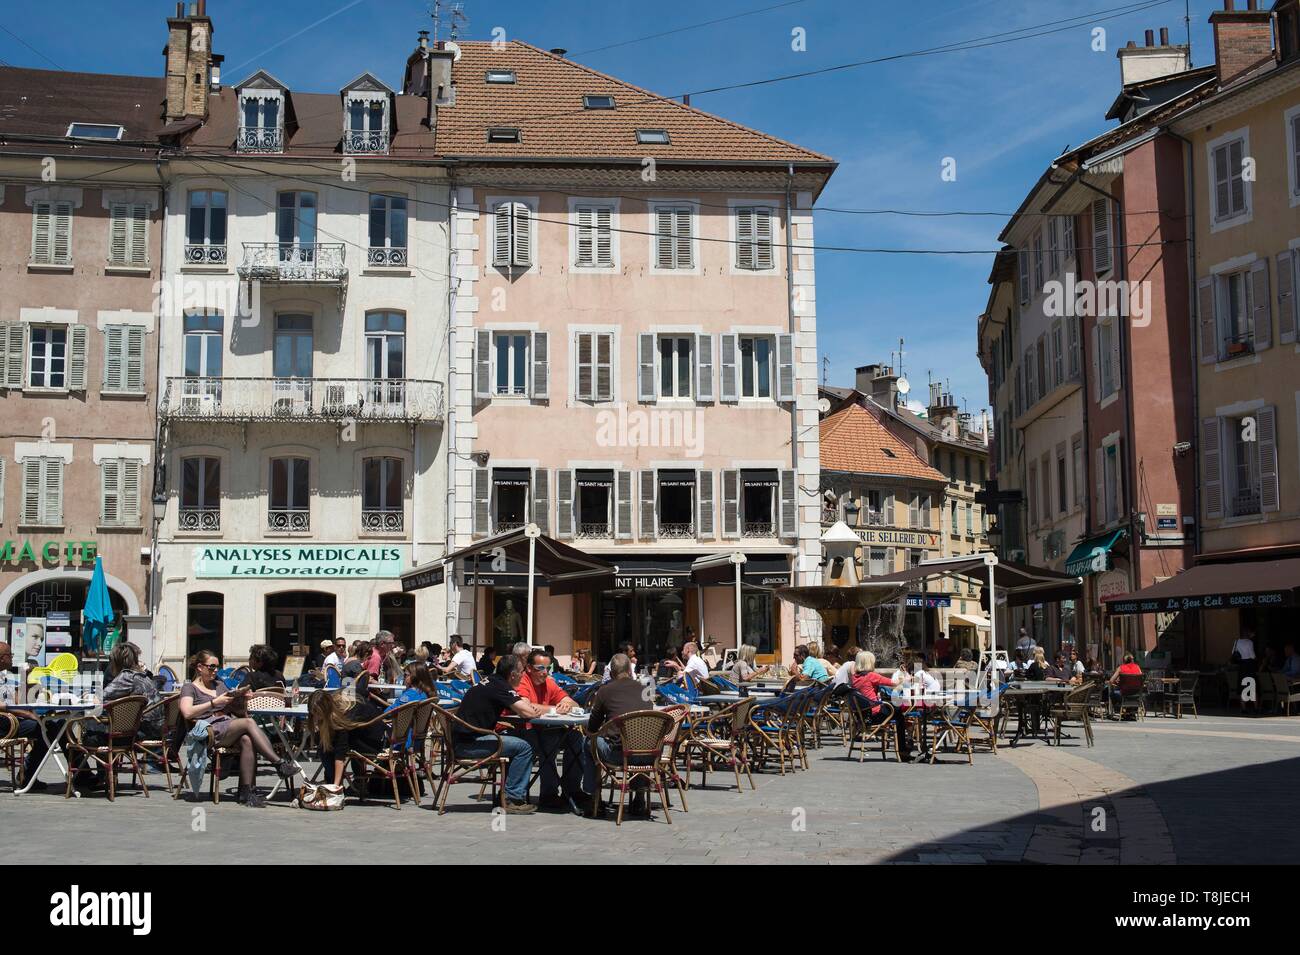 Jean Marcellin Square High Resolution Stock Photography and Images - Alamy